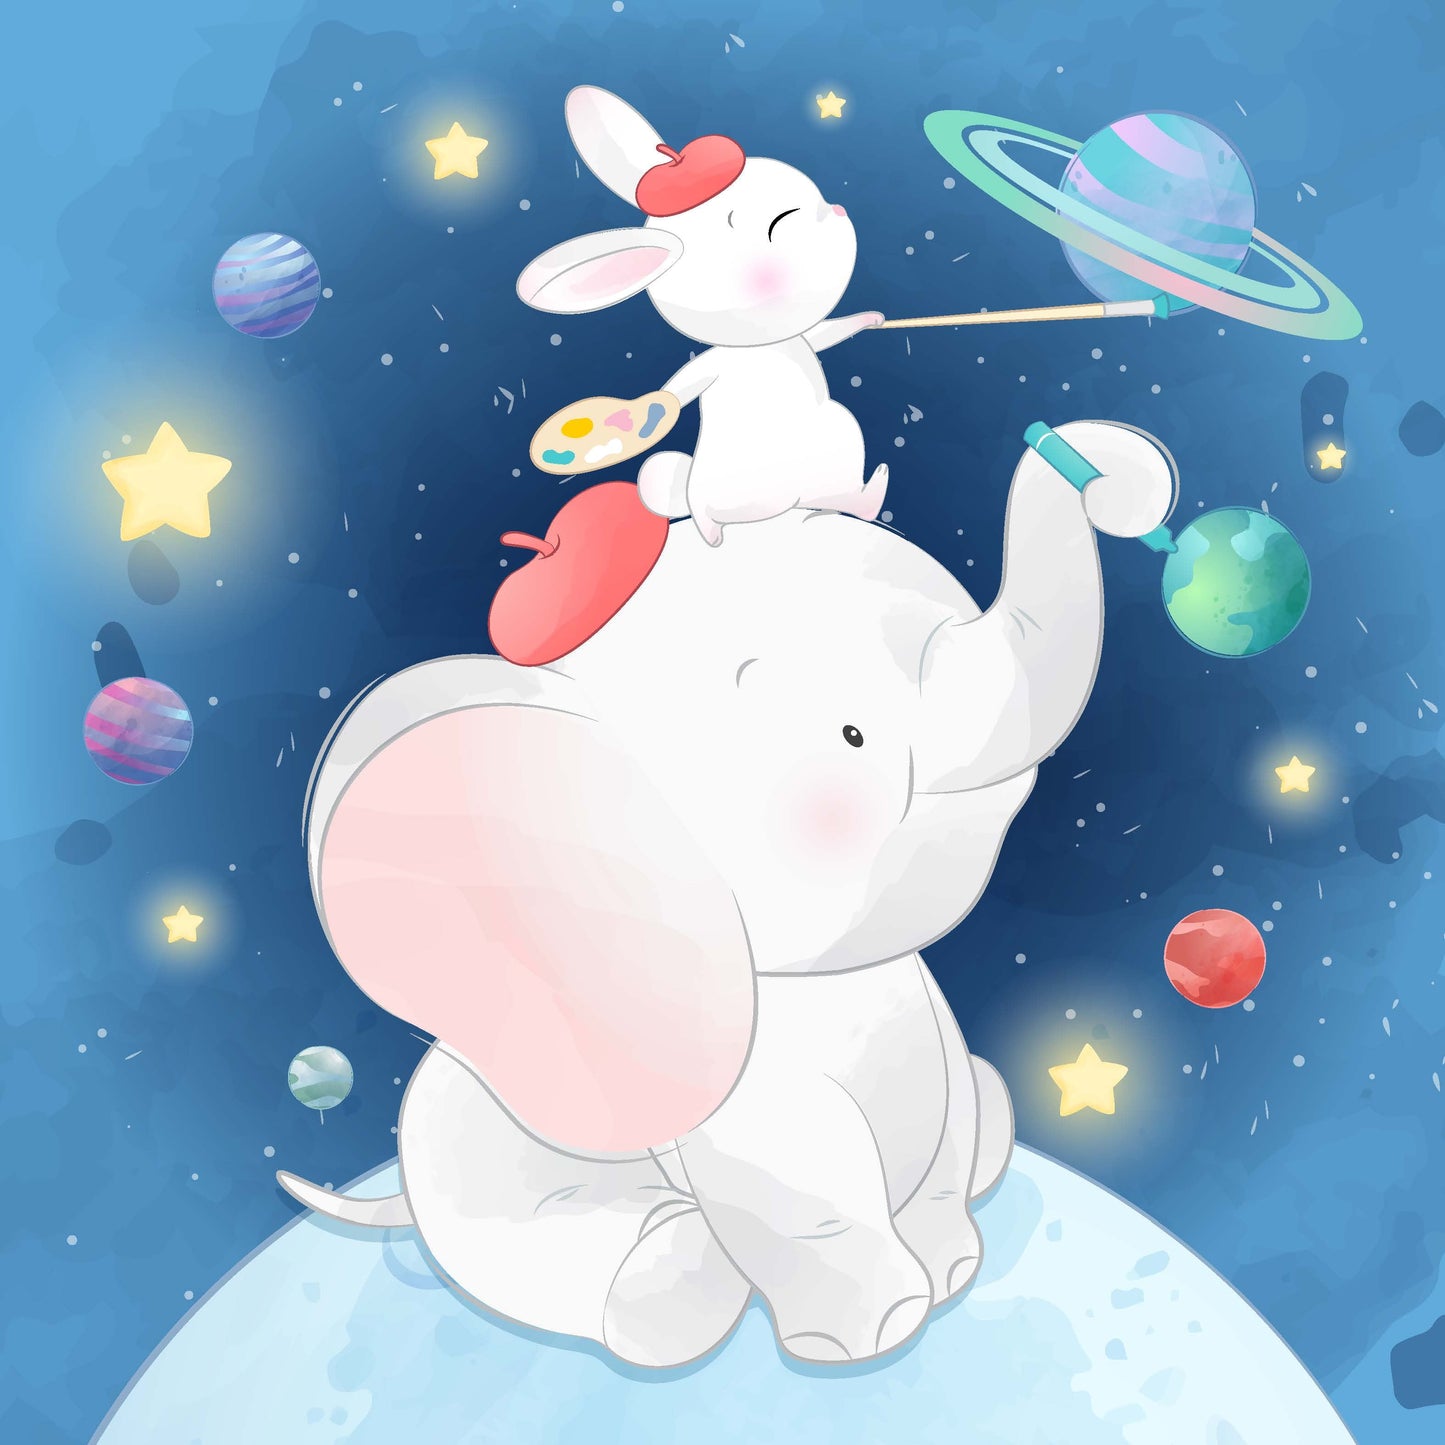 Elephant and Rabbit with Saturn